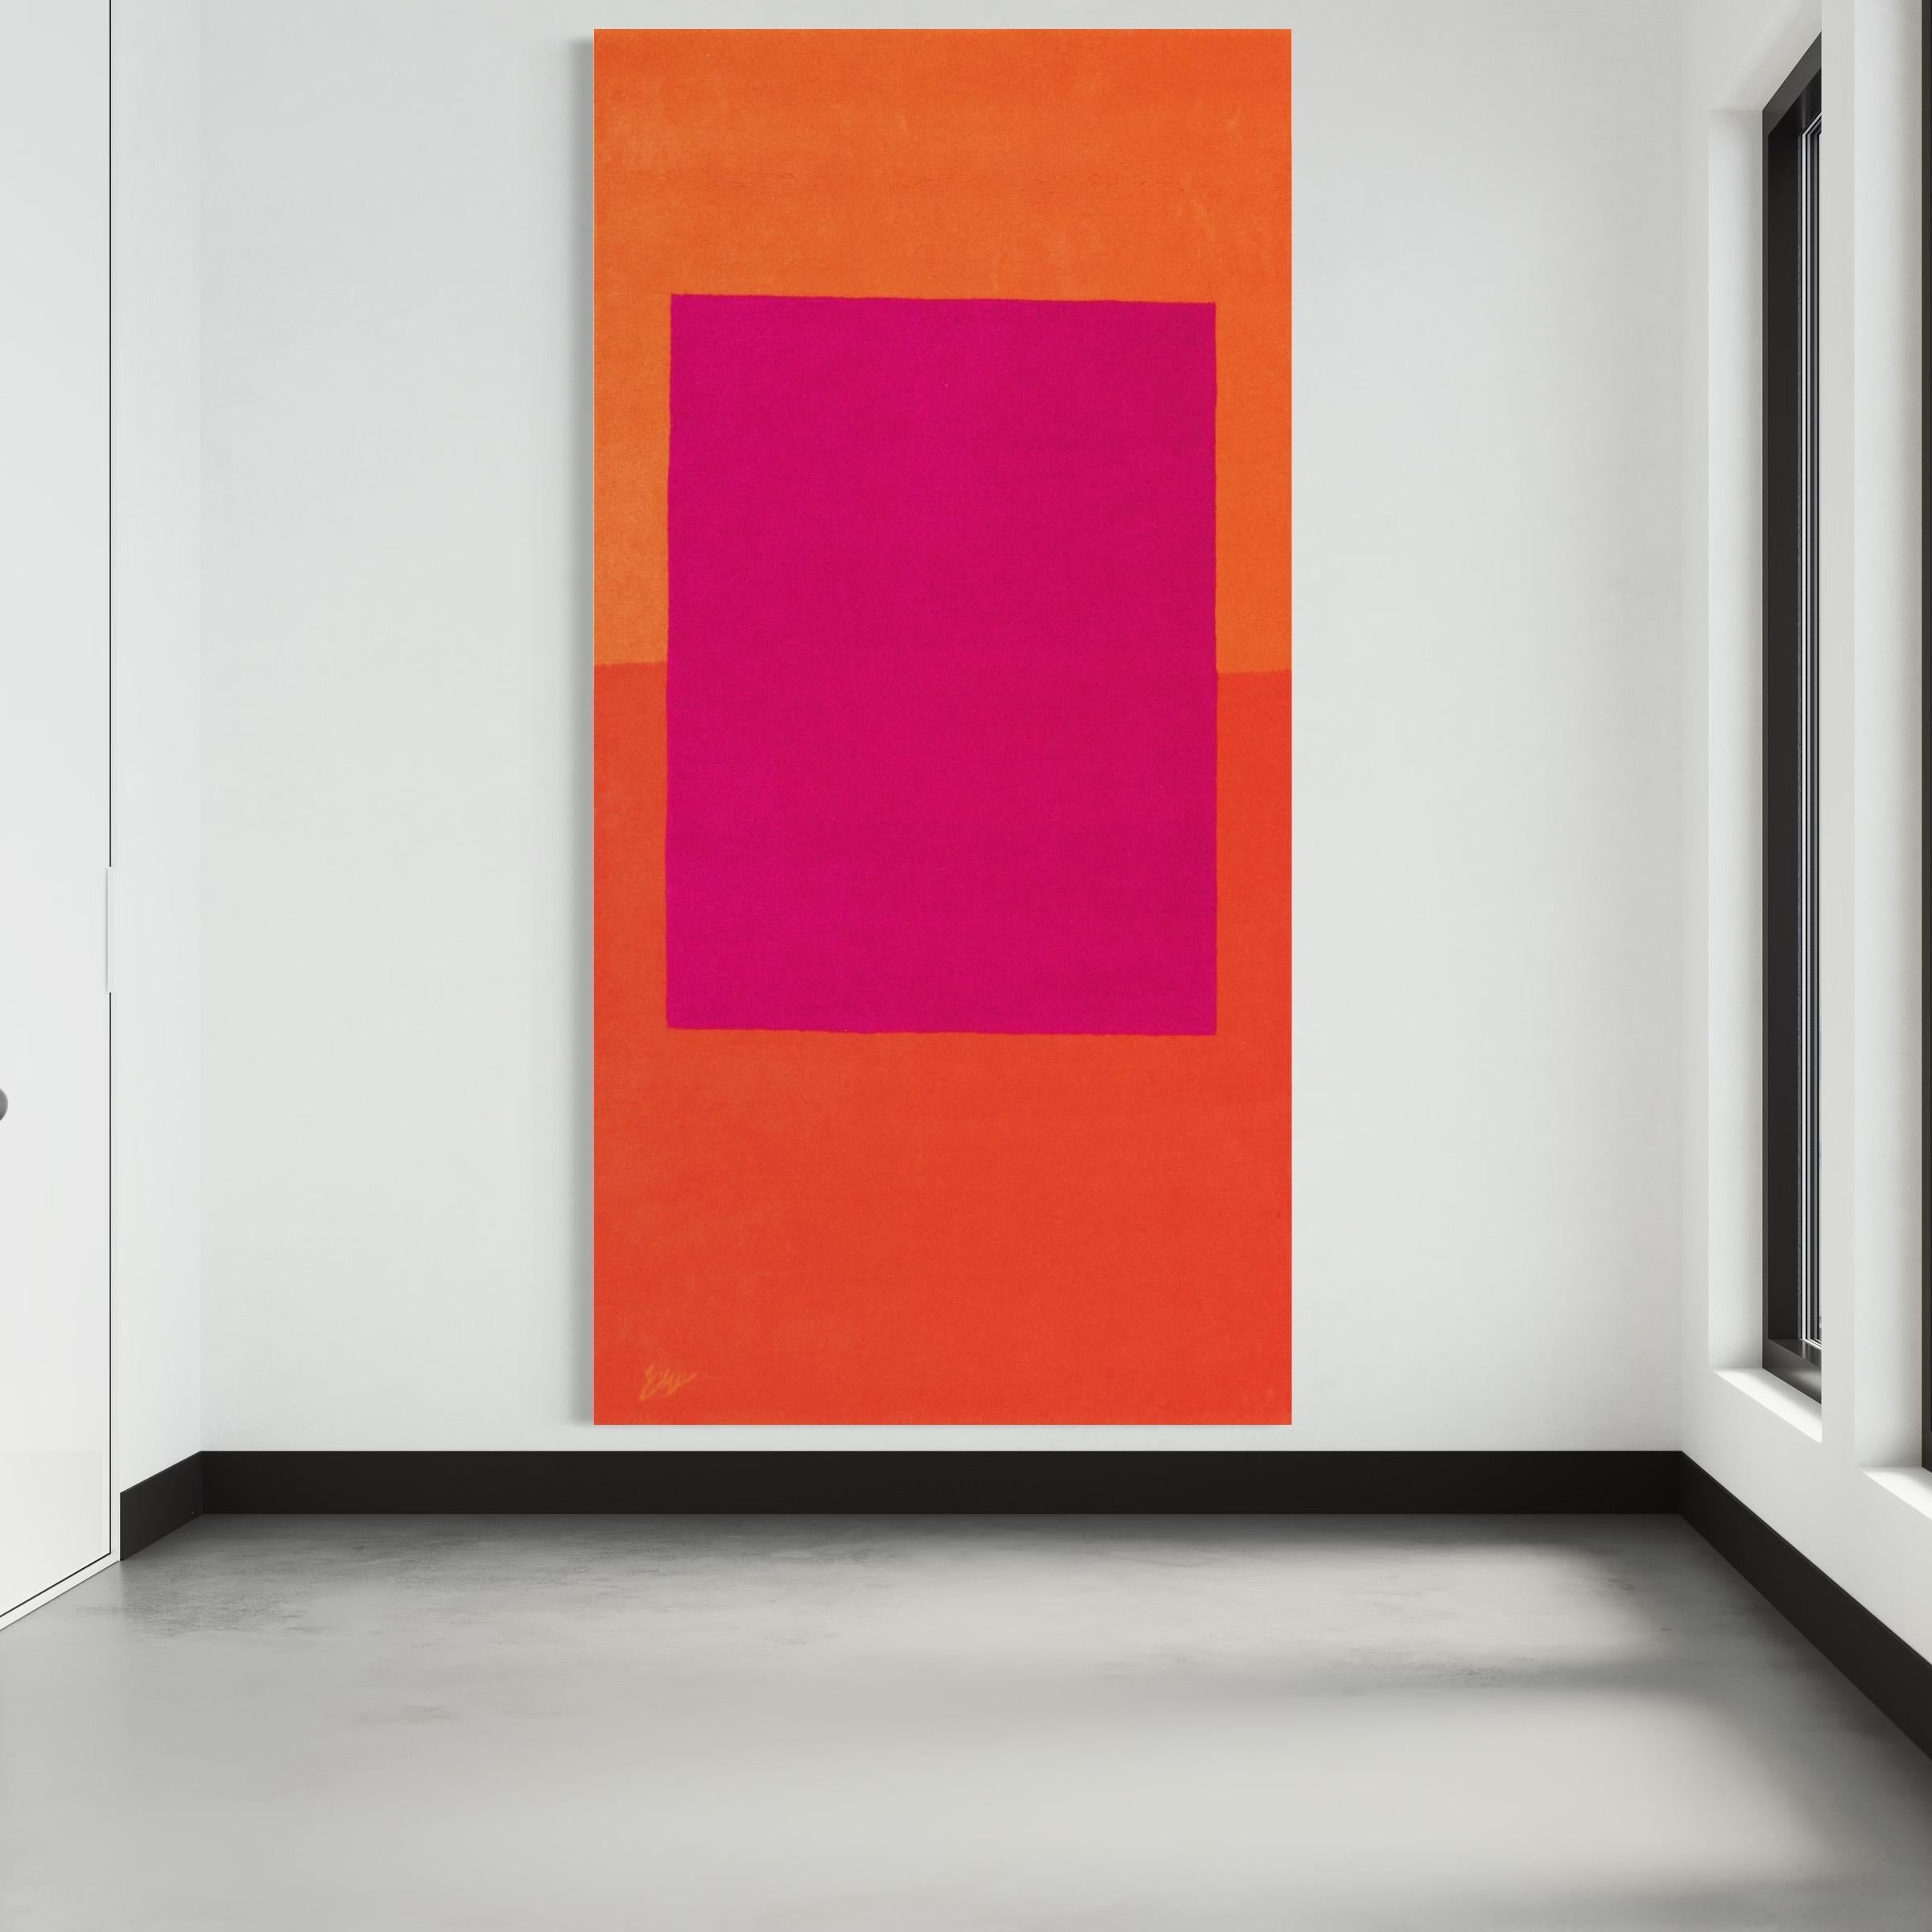 Rupprecht Geiger
Design RP III, 1970
Edition of 20
320 x 160 cm 
Published by Ewald Kröner
The artwork is offered unframed 
Edition number might vary from what is shown in the pictures

Rupprecht Geiger was a German Color Field painter whose work